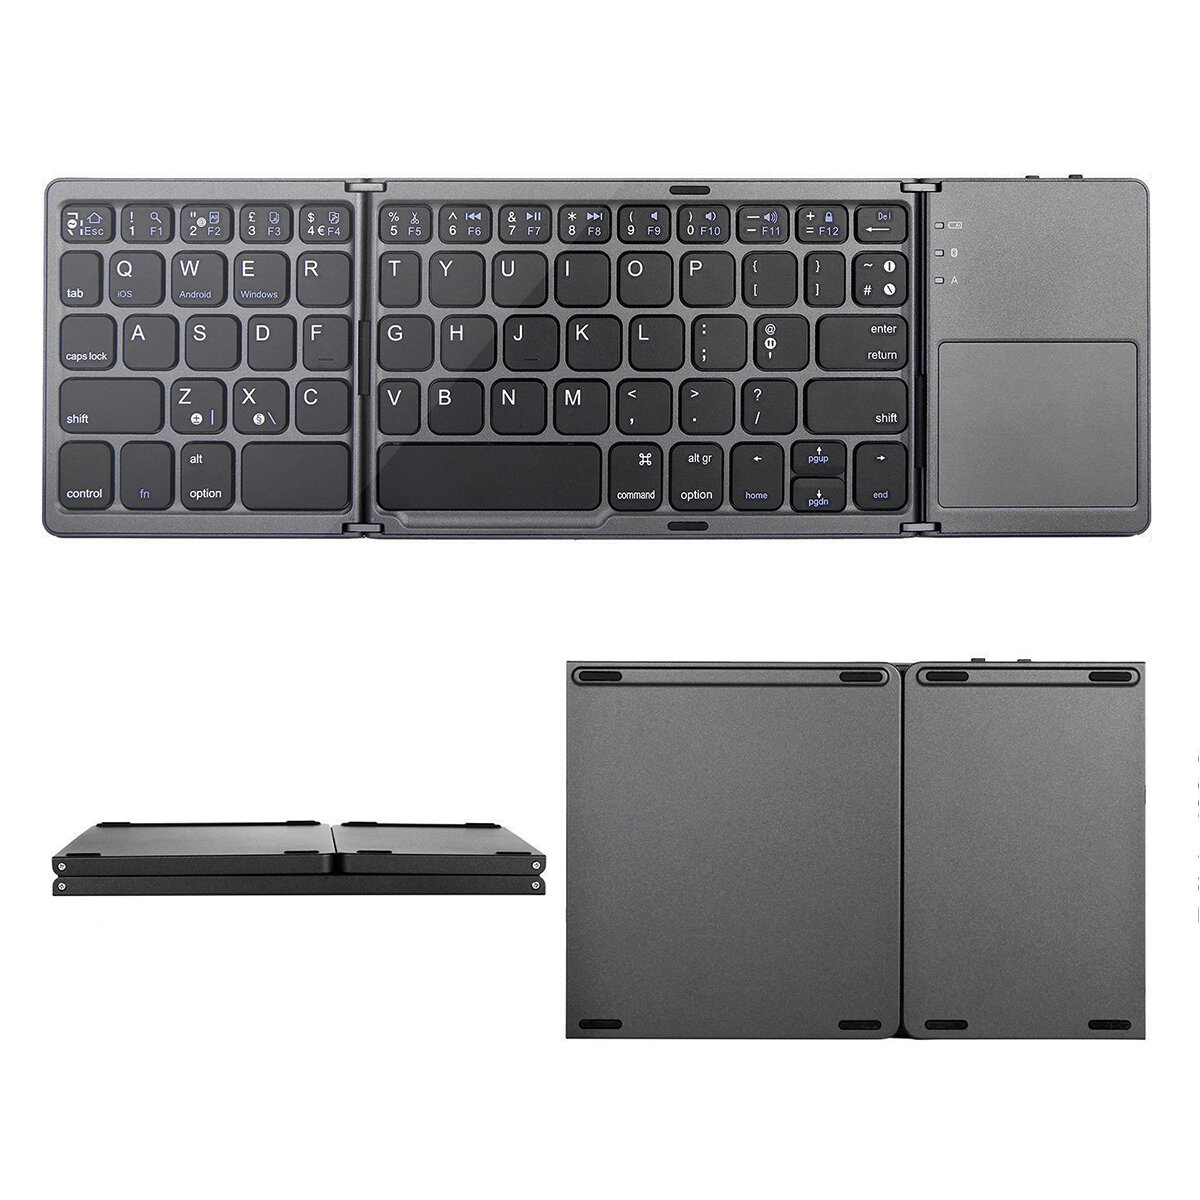 for DeX Station Galaxy Note 20 Ultra Z Fold 2 Note 20, 10, 9 & 8 S 20 etc. fireCable Foldable Pocket Keyboard and Touchpad Mouse